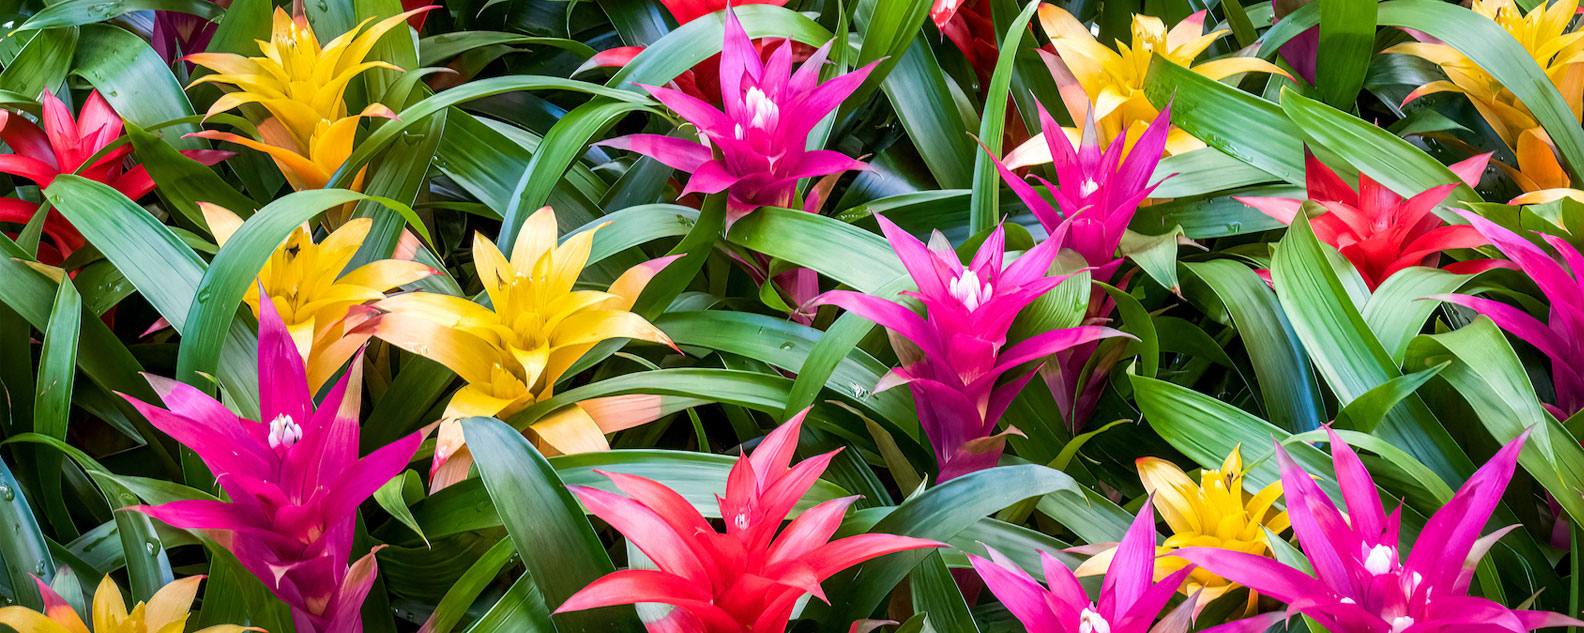 A collection of colourful bromeliads